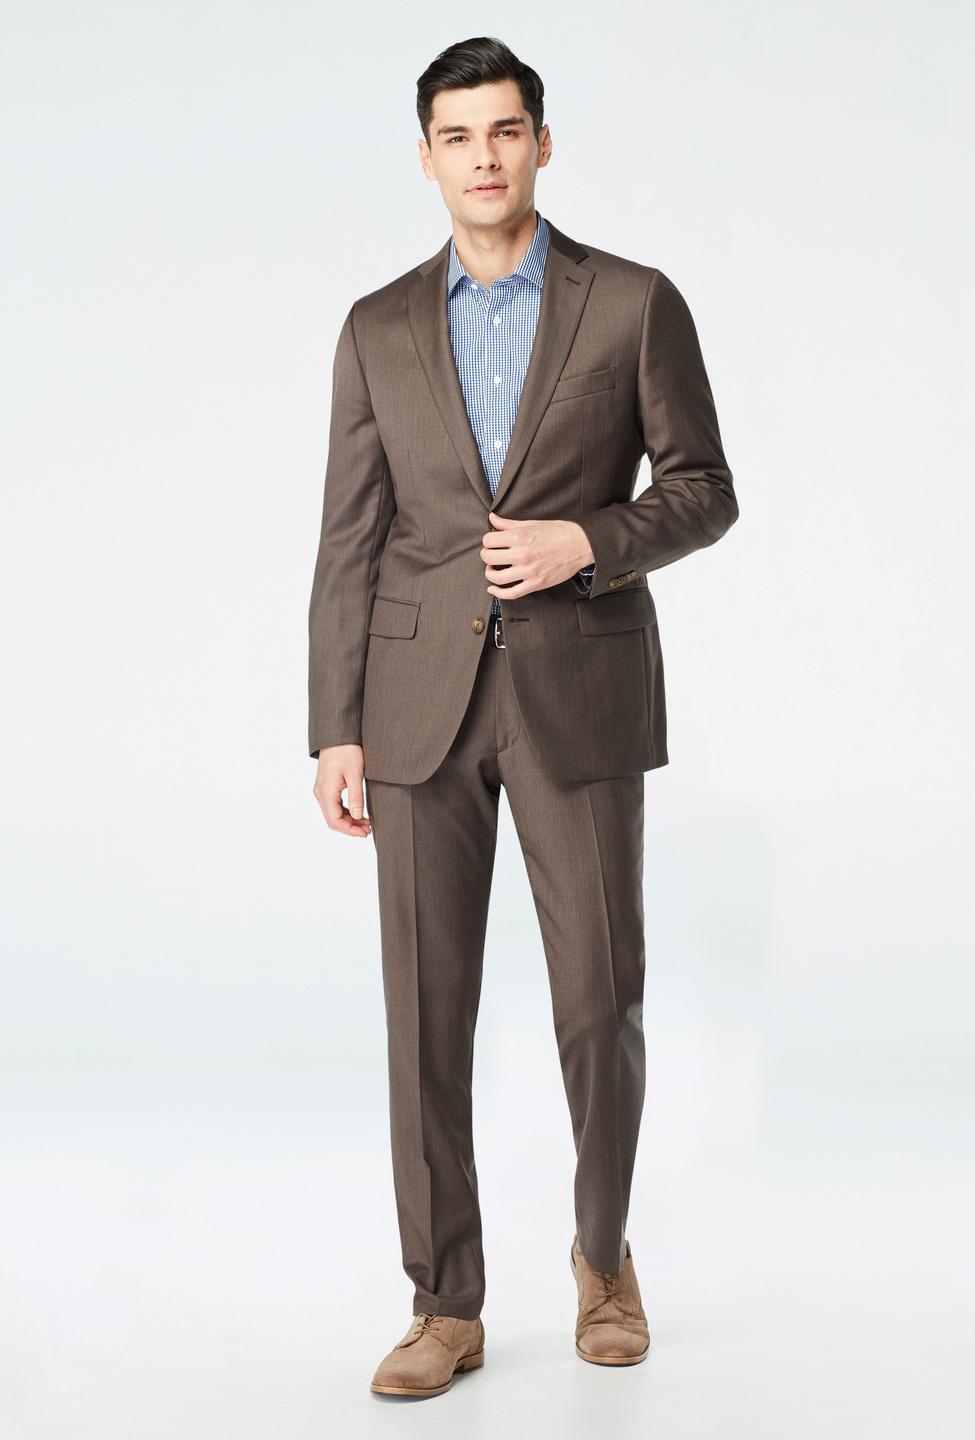 Brown suit - Hemsworth Solid Design from Premium Indochino Collection